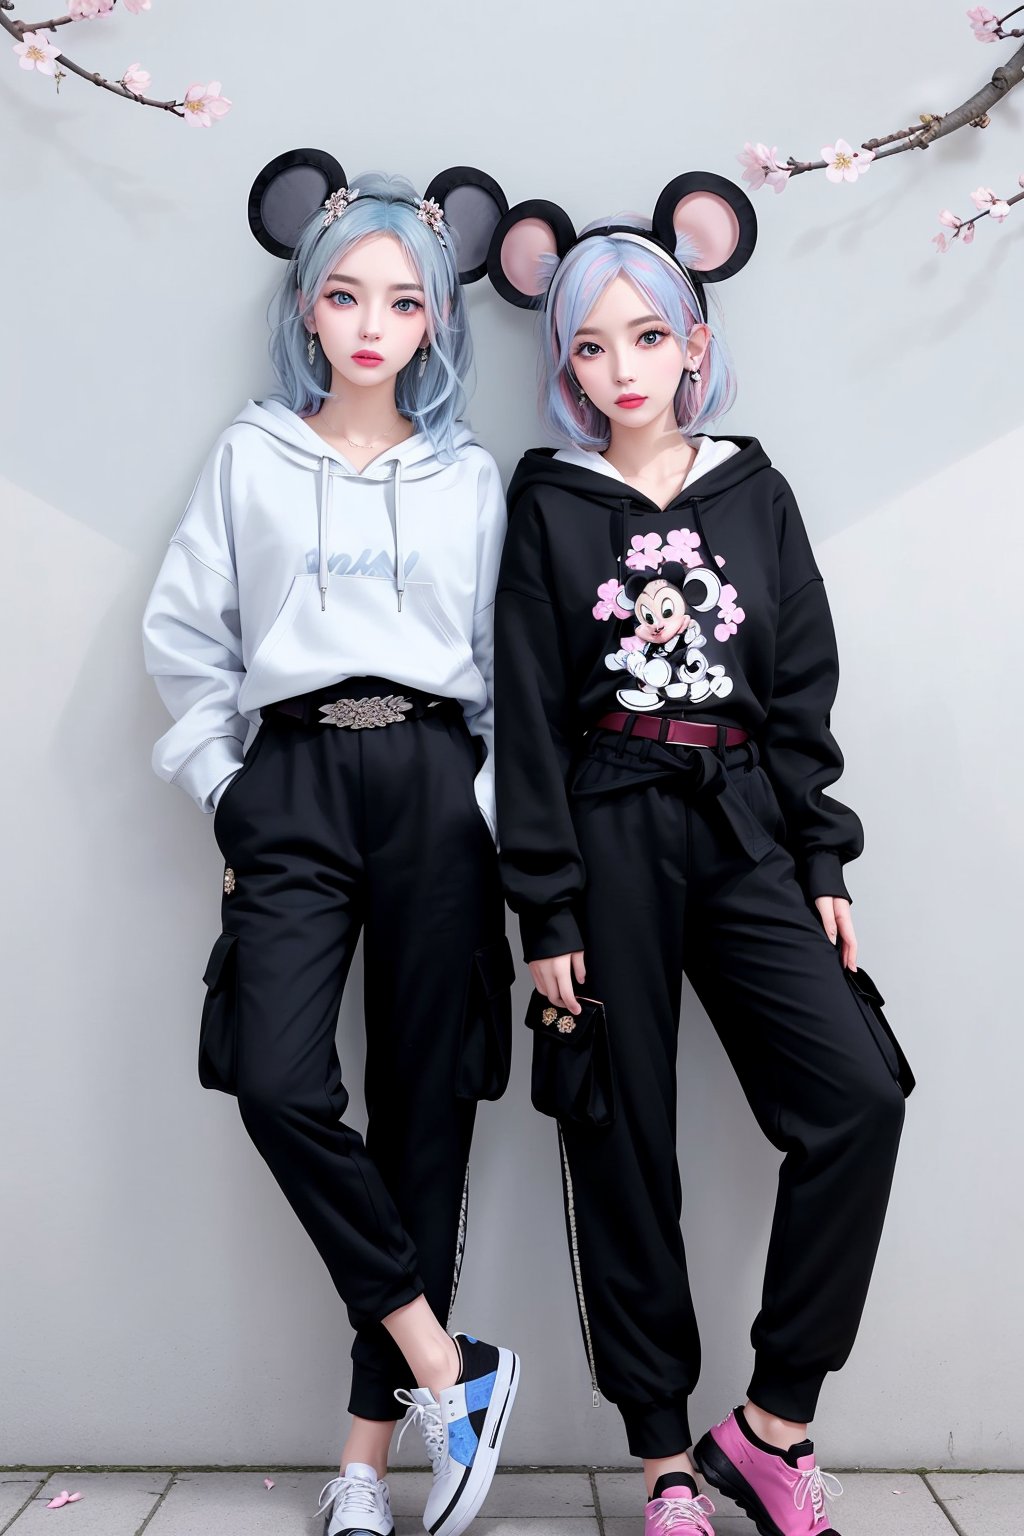 2girls, different face, blush, blue eye, (white and blue highlight hair: 1.4), (((mini_mouse ear headband))), Donatella Versace designed: (((black pattern hoodie))), and (((cargo pants))), (((waist fancy belts))), (((fancy shoes))), stylish clothing, different clothing, messy_hair, (((simple cherry blossoms wall background))), nervous and embarrassed expression in their face, ((awsome posing)),medium full shot,two_girl,2girls,different_clothes